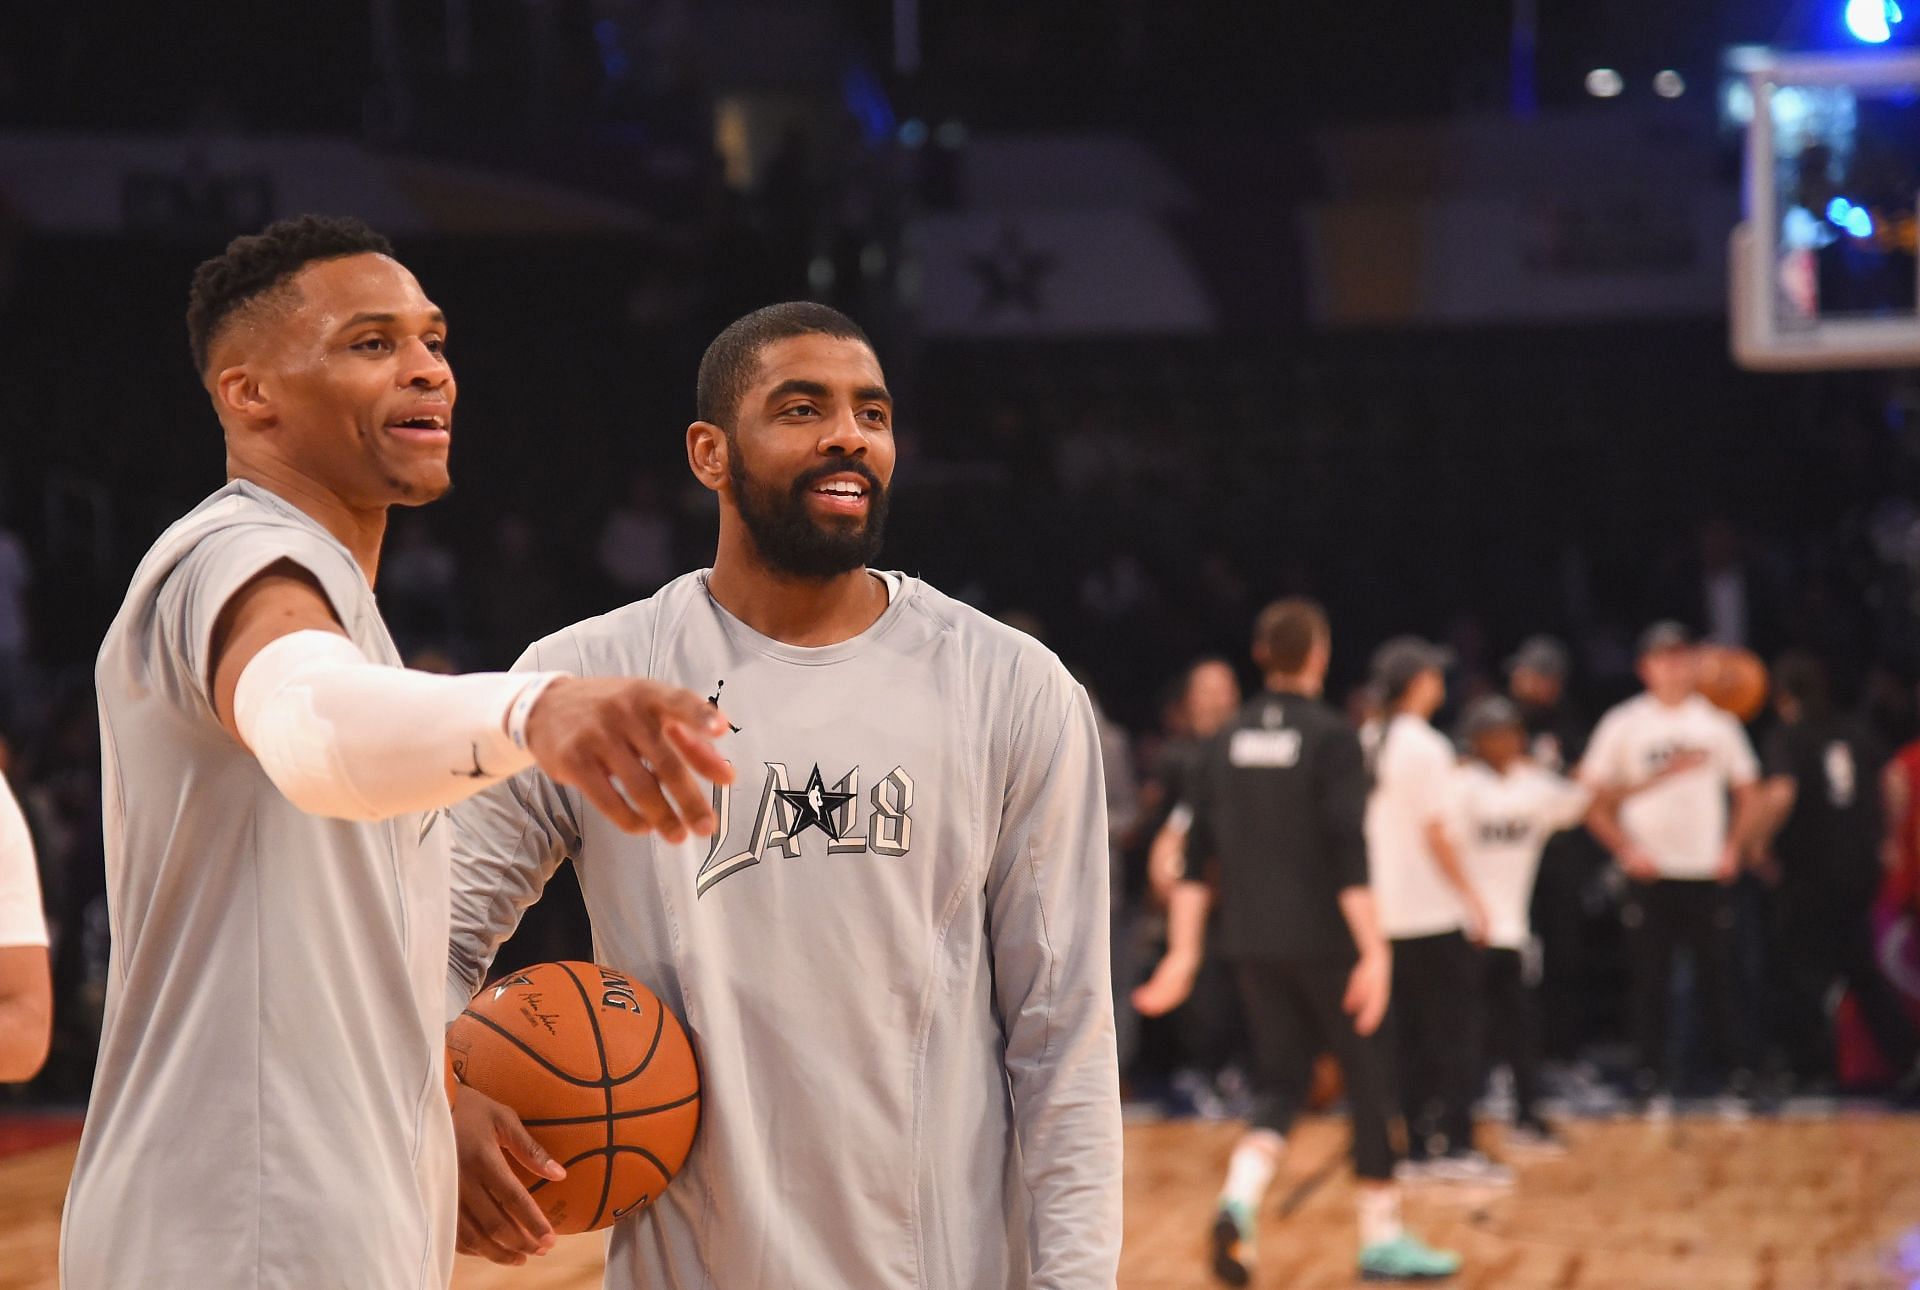 Russell Westbrook and Kyrie Irving warm up during the NBA All-Star Game 2018 at Staples Center on February 18, 2018 in Los Angeles, California.